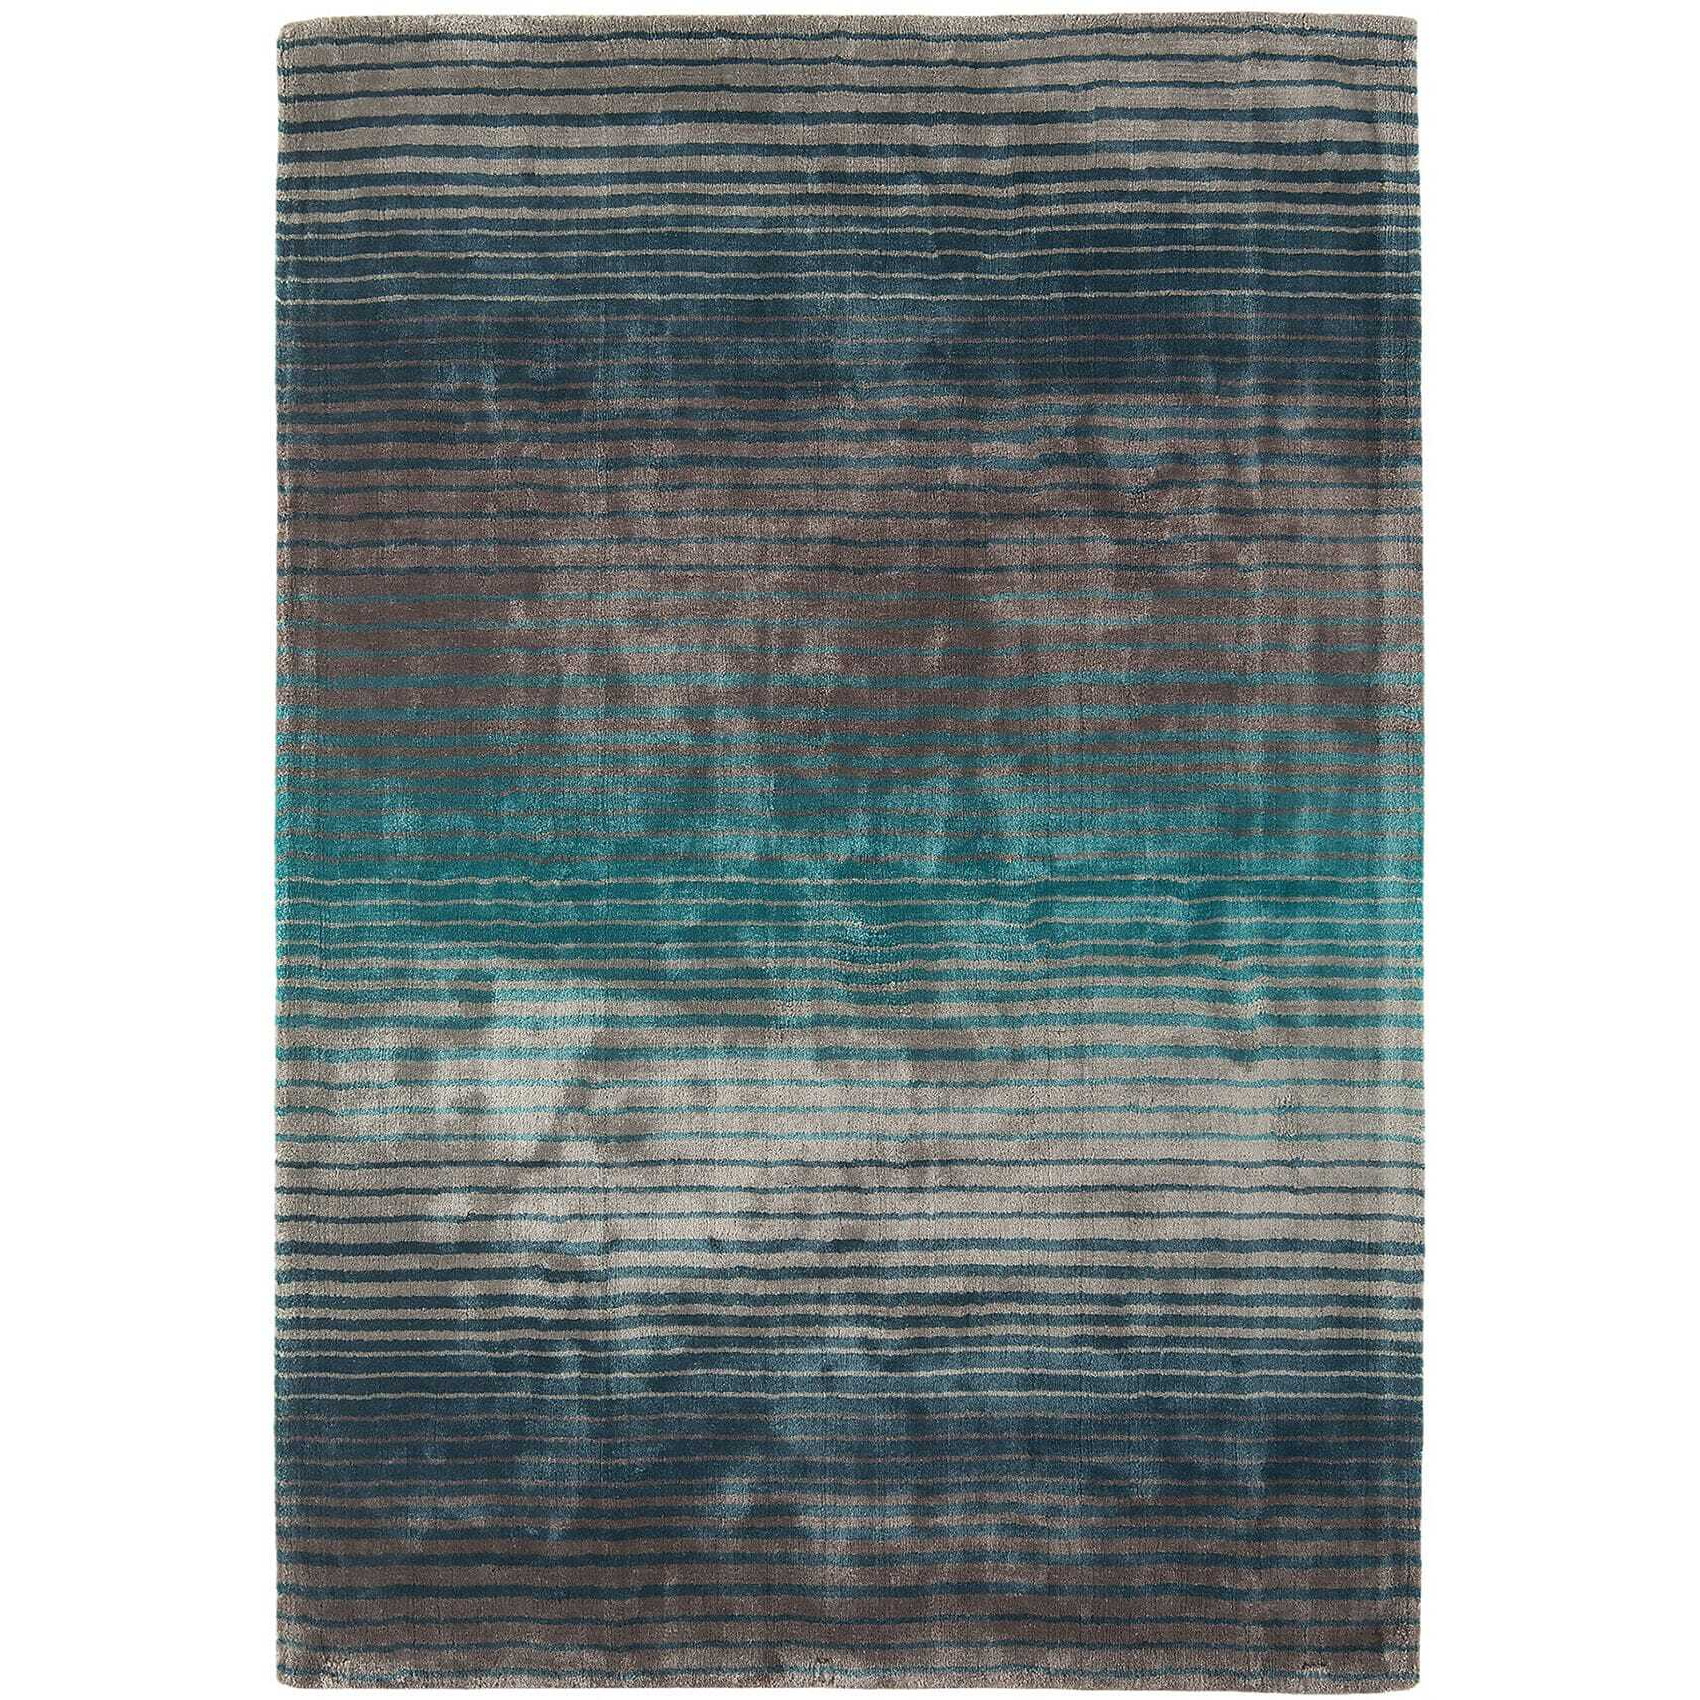 Asiatic Carpets Holborn Hand woven Rug Turquoise - 160 x 230cm - image 1